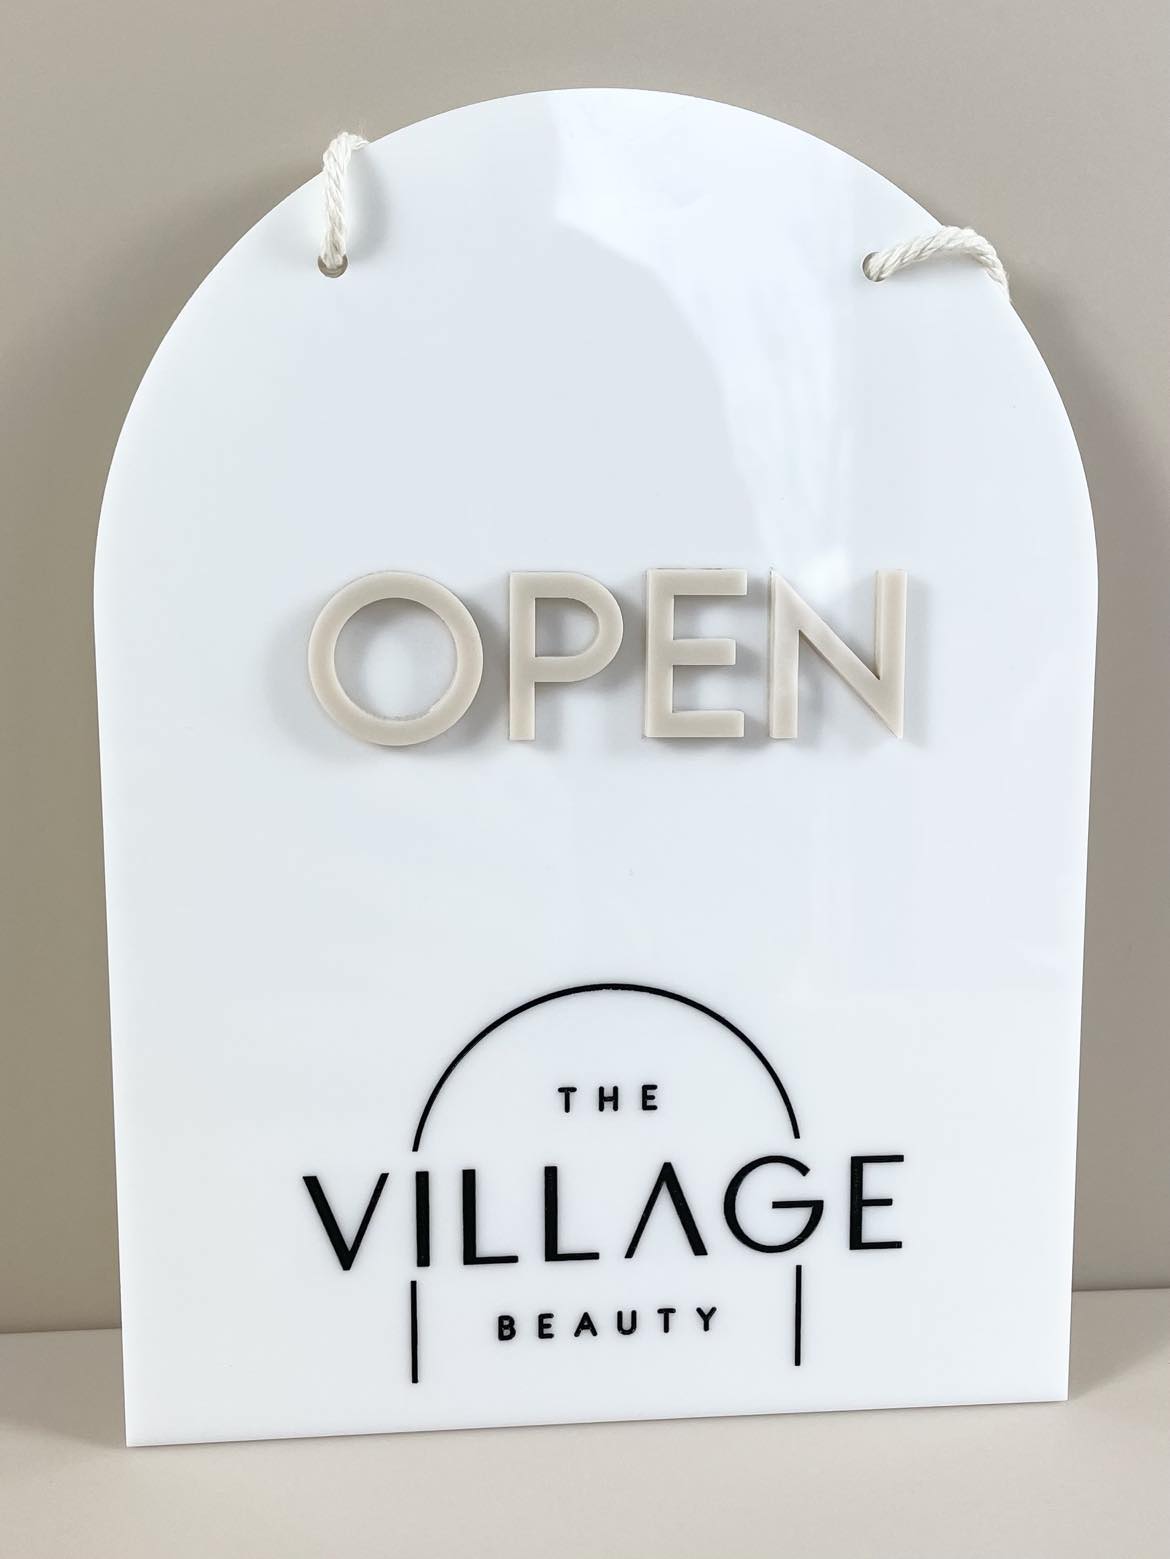 Mini open/closed sign (Arched)